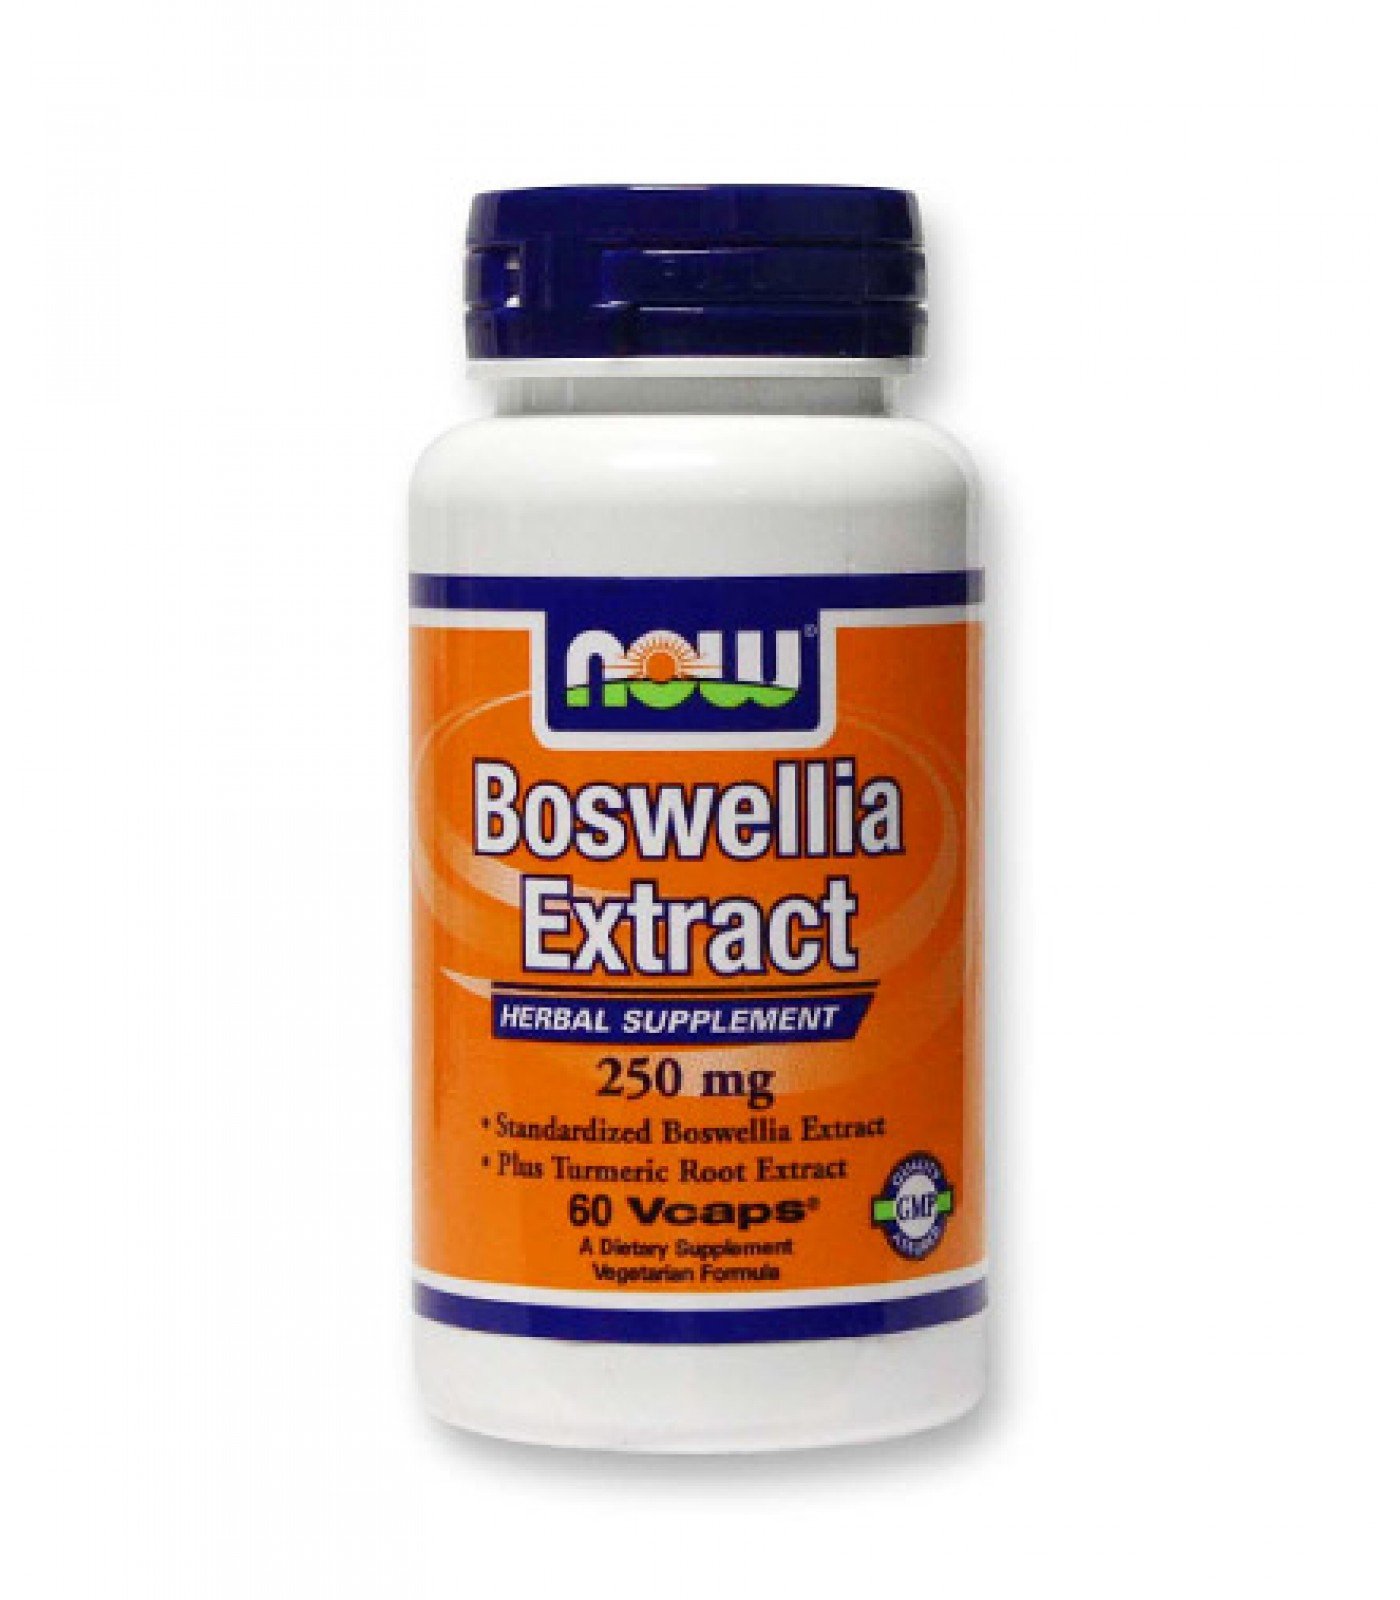 NOW - Boswellia Extract 250mg. / 60 VCaps.